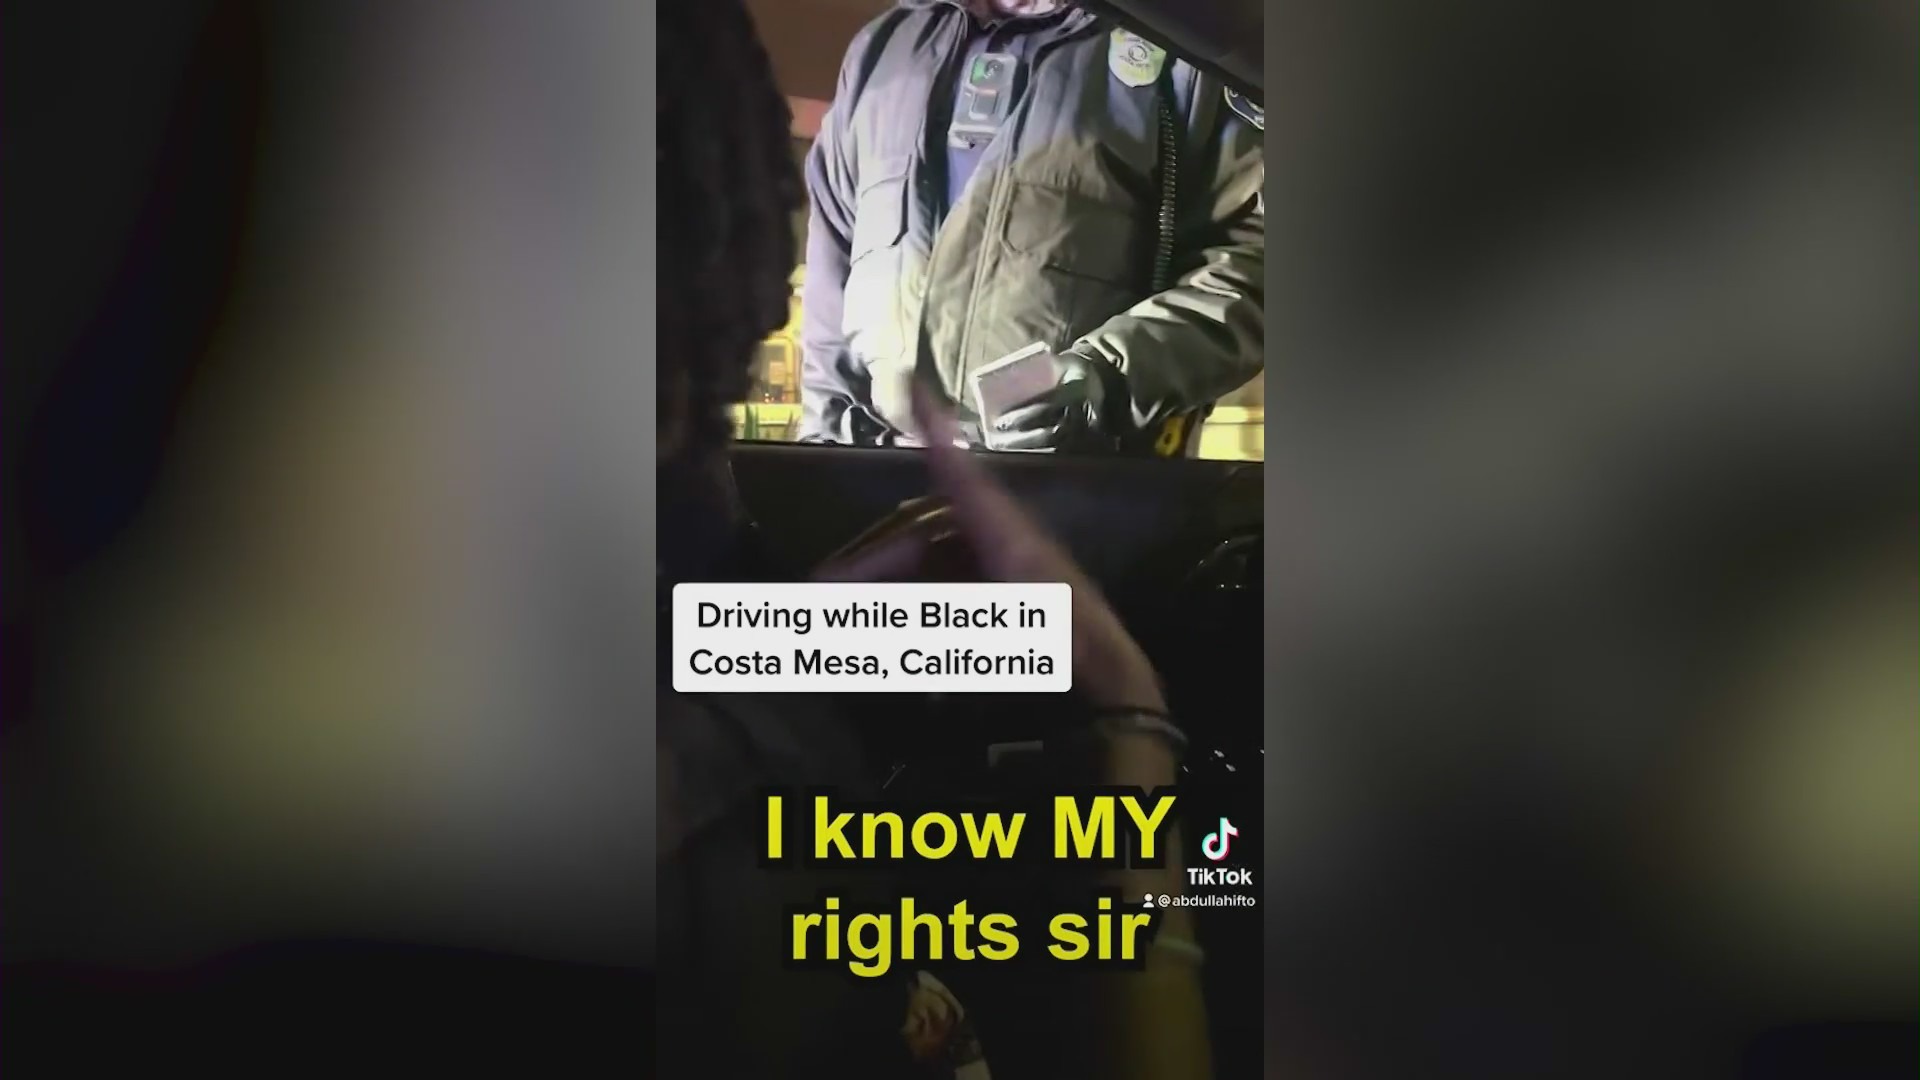 Video posted on social media has triggered accusations of racial profiling after Abdullahi Aden, 22, recorded a traffic stop in Costa Mesa. (Abdullahi Aden)